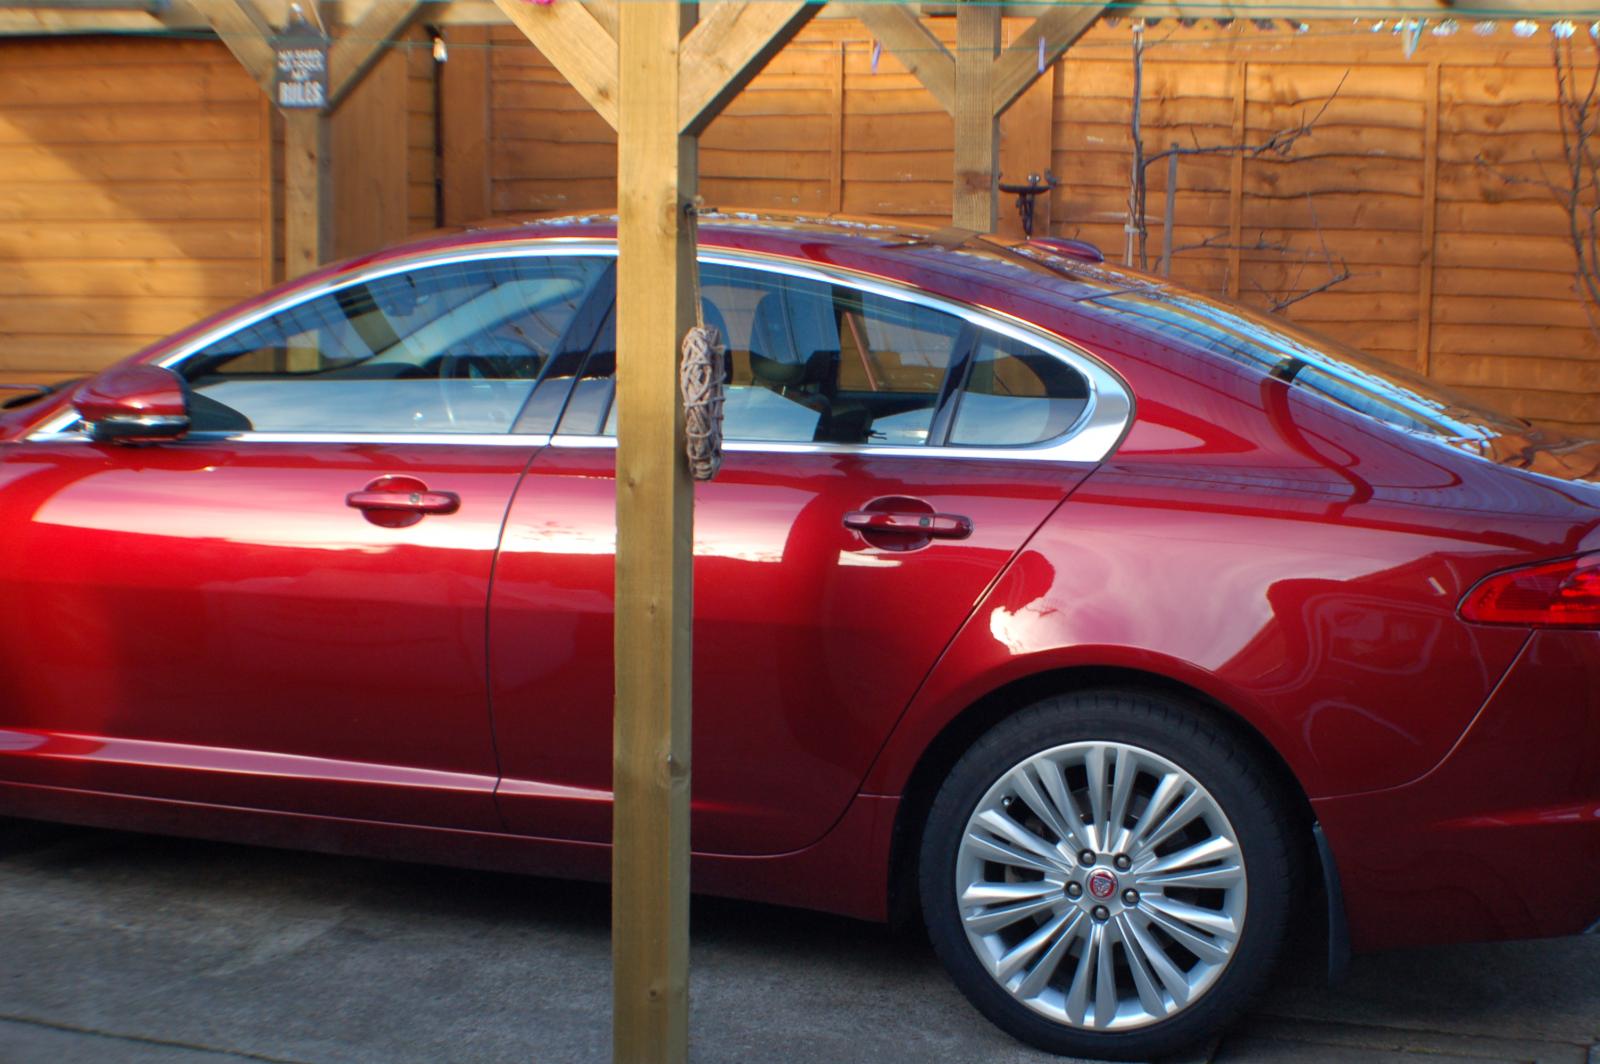 My XF the best colour in my opinion - Claret Red.